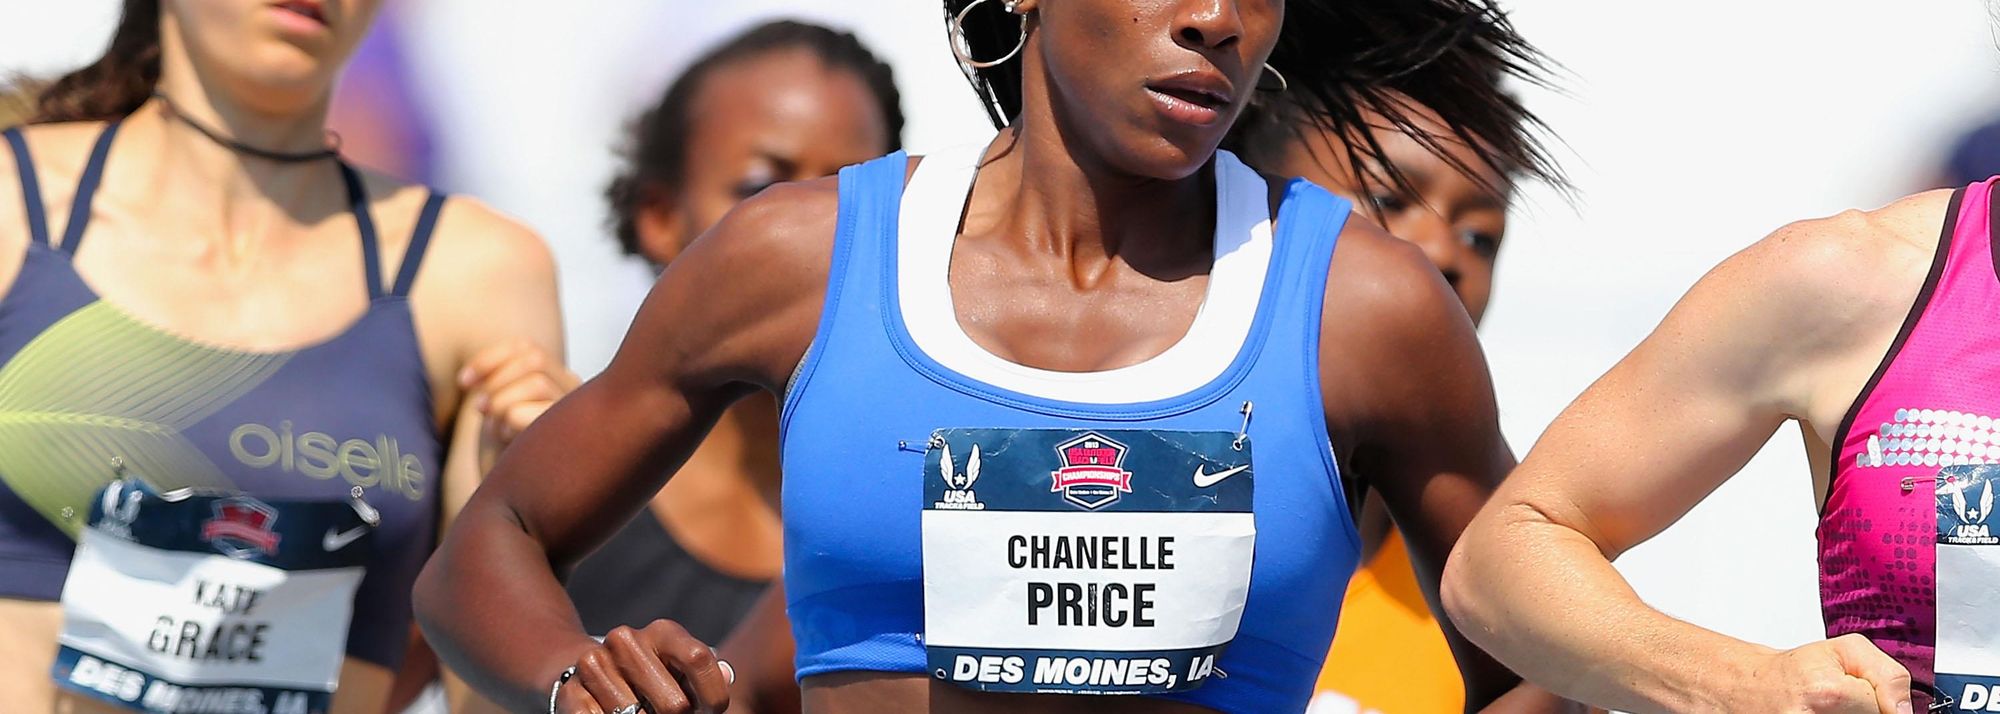 On the brink of packing it in last summer, find out how Chanelle Price completely changed her life to win 800m world indoor gold.